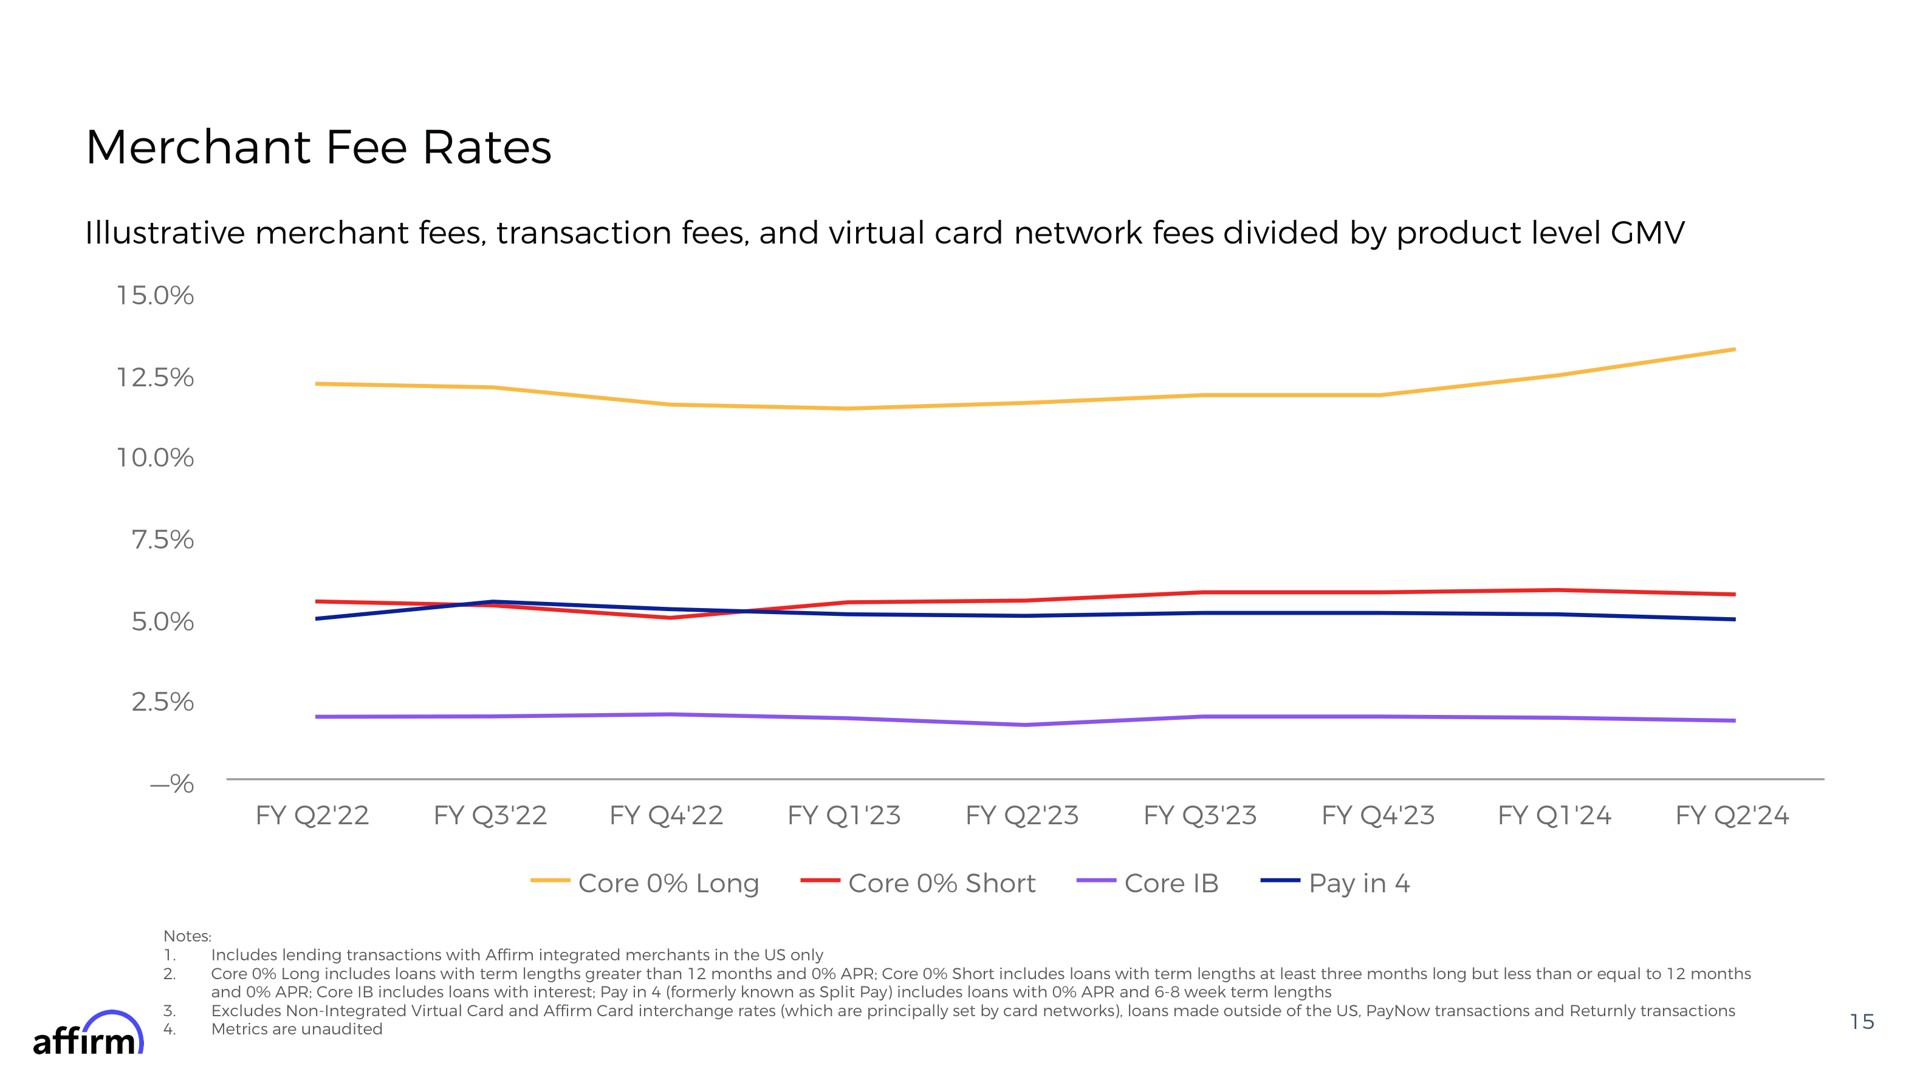 merchant fee rates illustrative merchant fees transaction fees and virtual card network fees divided by product level affirm | Affirm